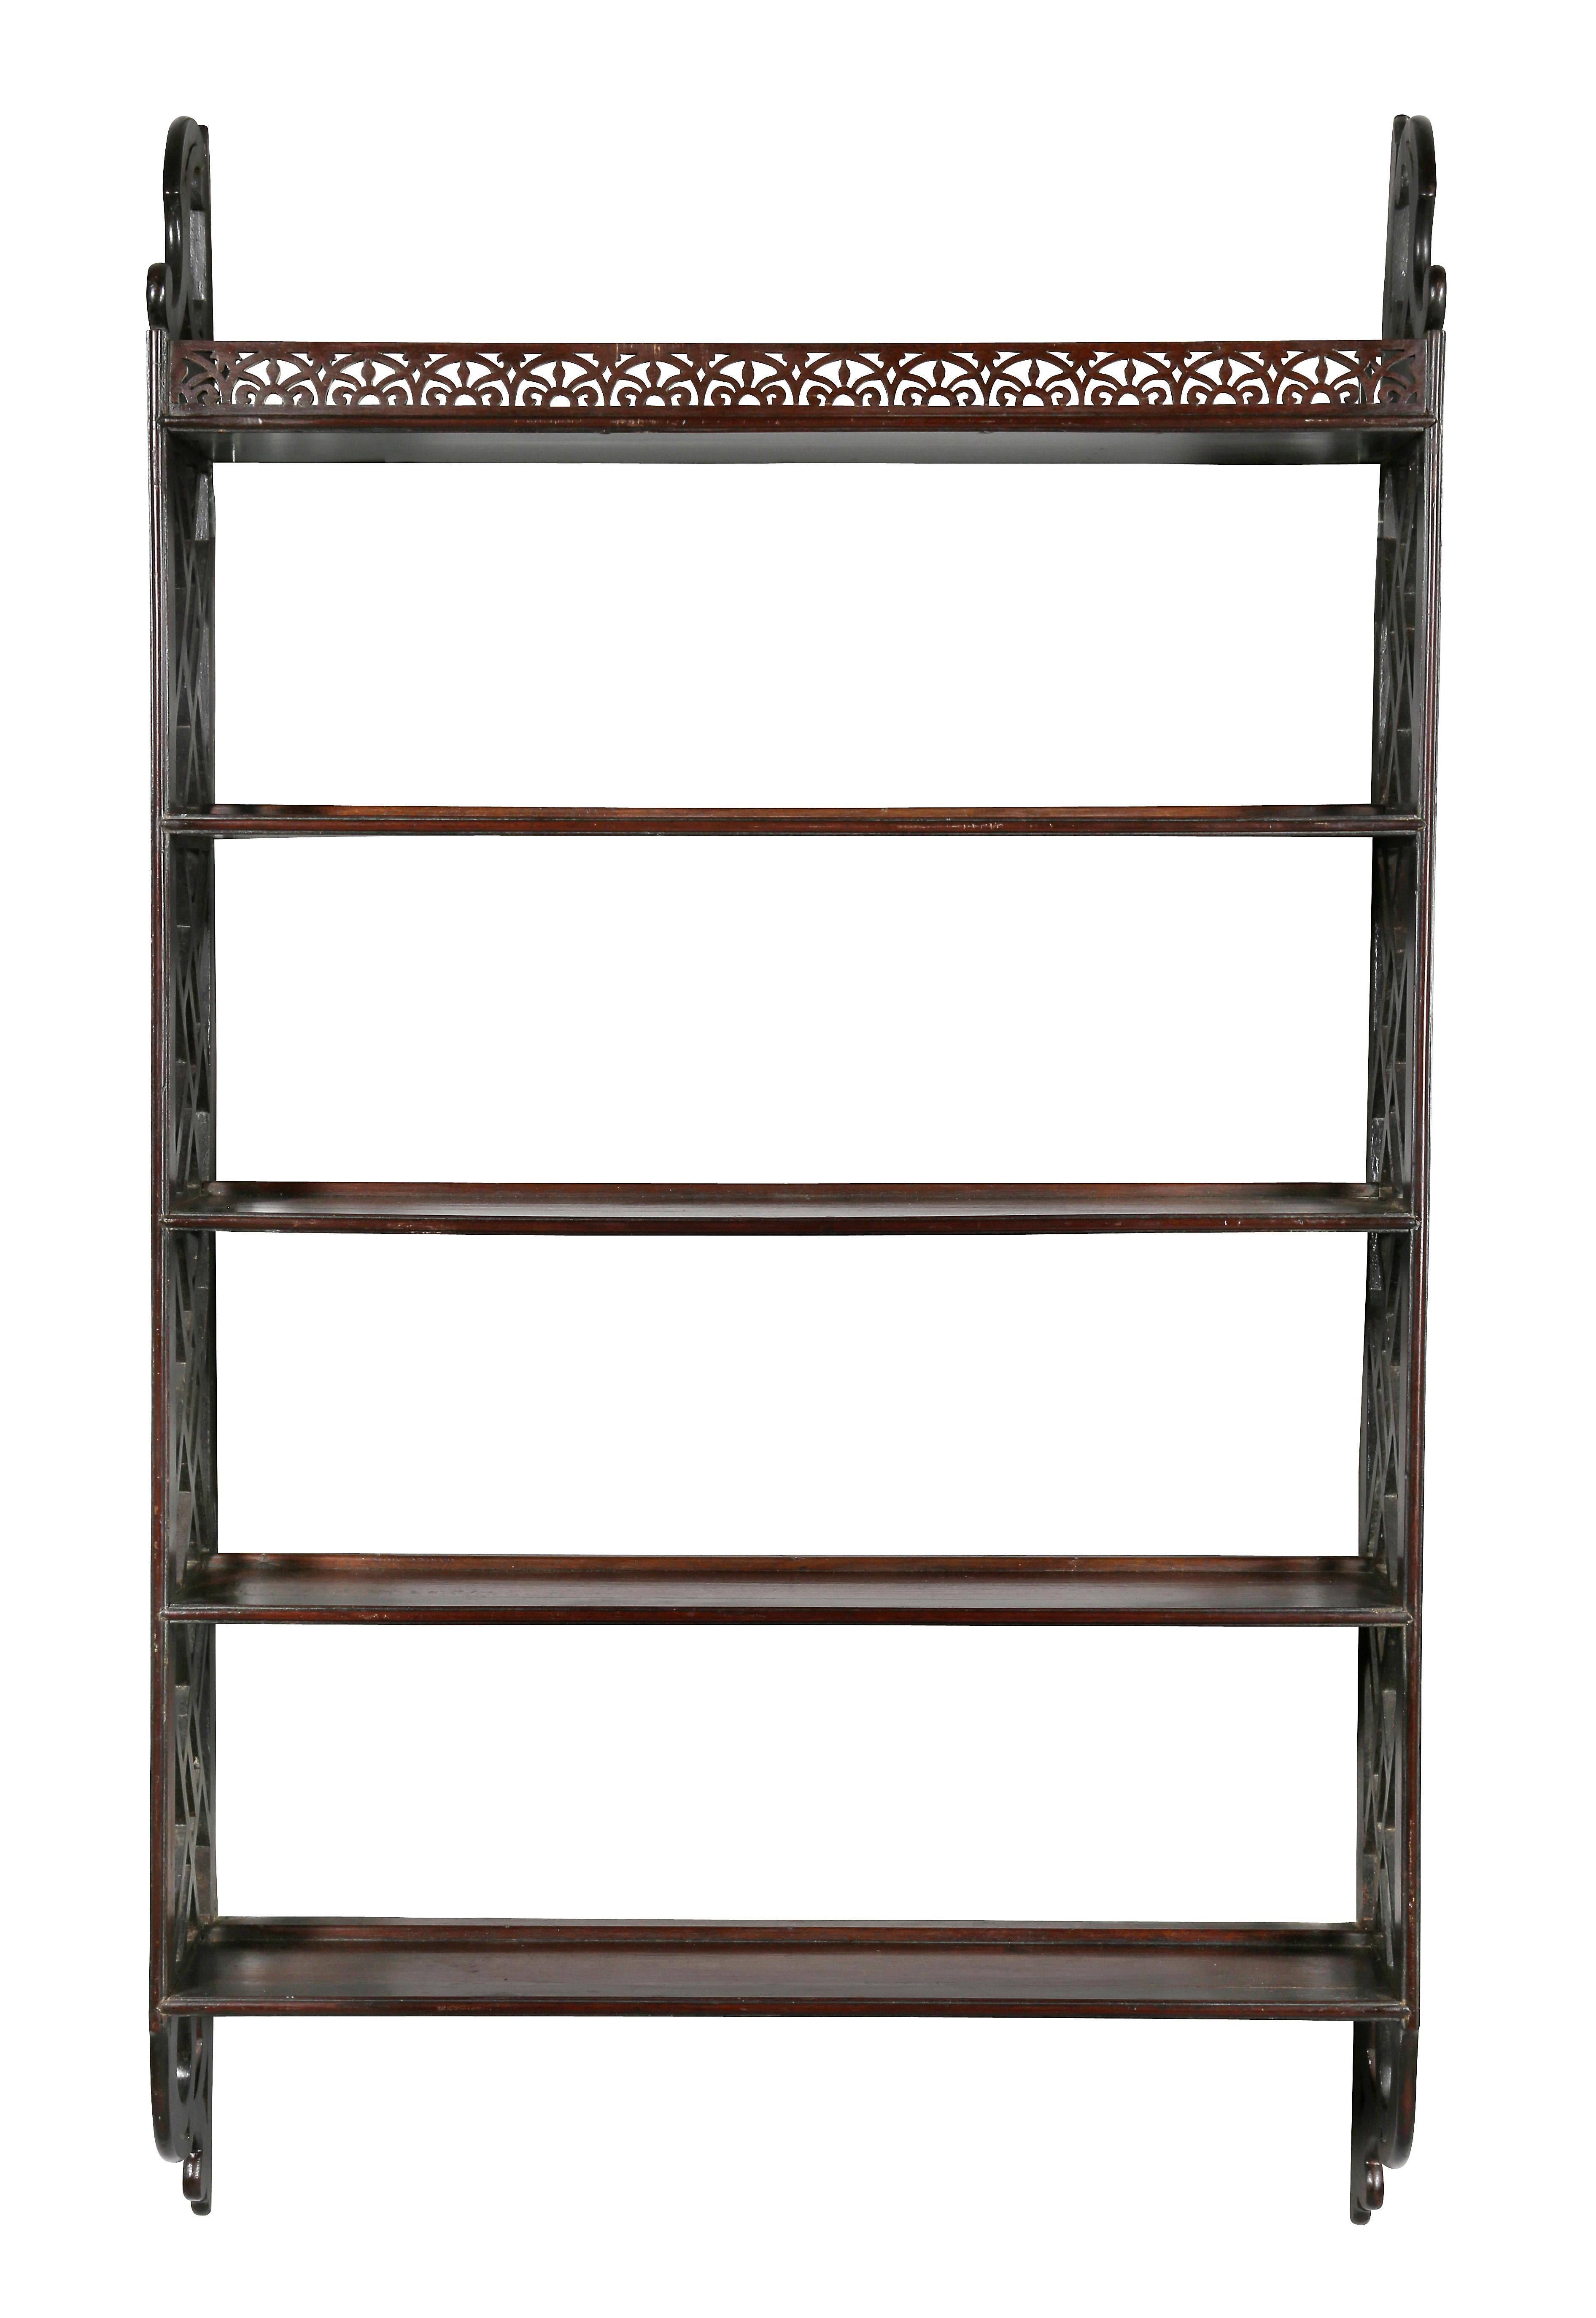 Four shelves over a fret carved gallery, sides with Chinese style open trellis work, scrolled volutes brackets top and bottom.